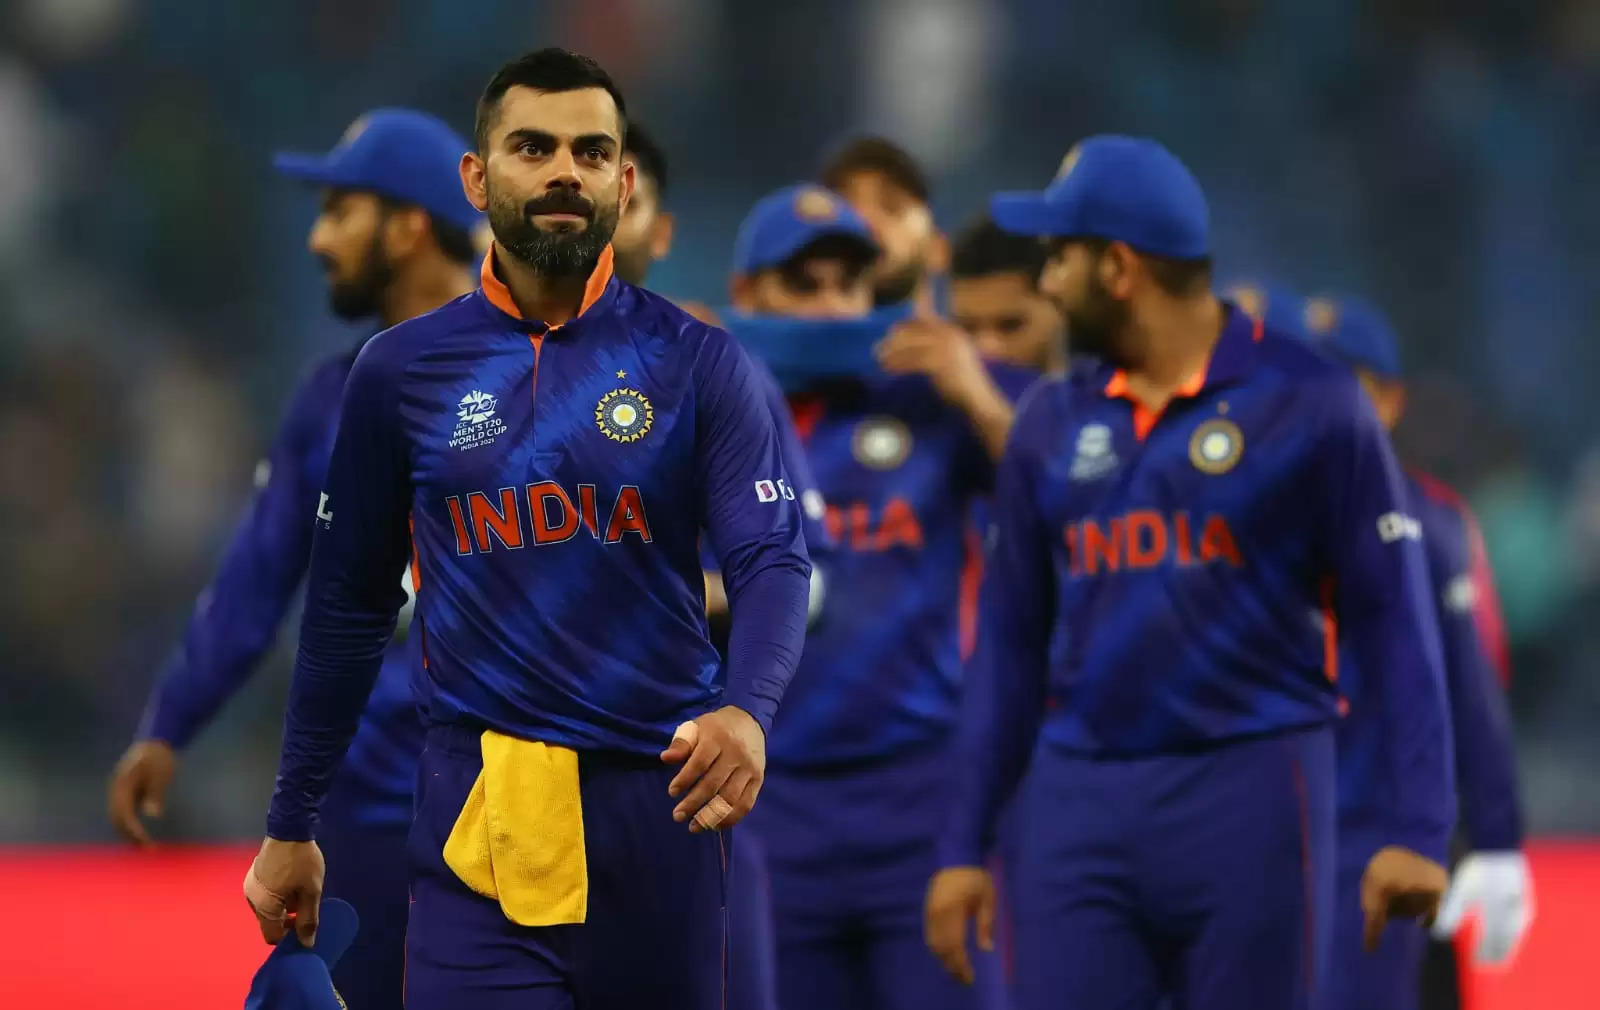 IND vs NAM Dream11 Prediction for T20 World Cup 2021: Playing XI, Fantasy Cricket Tips, Team, Weather Updates and Pitch Report